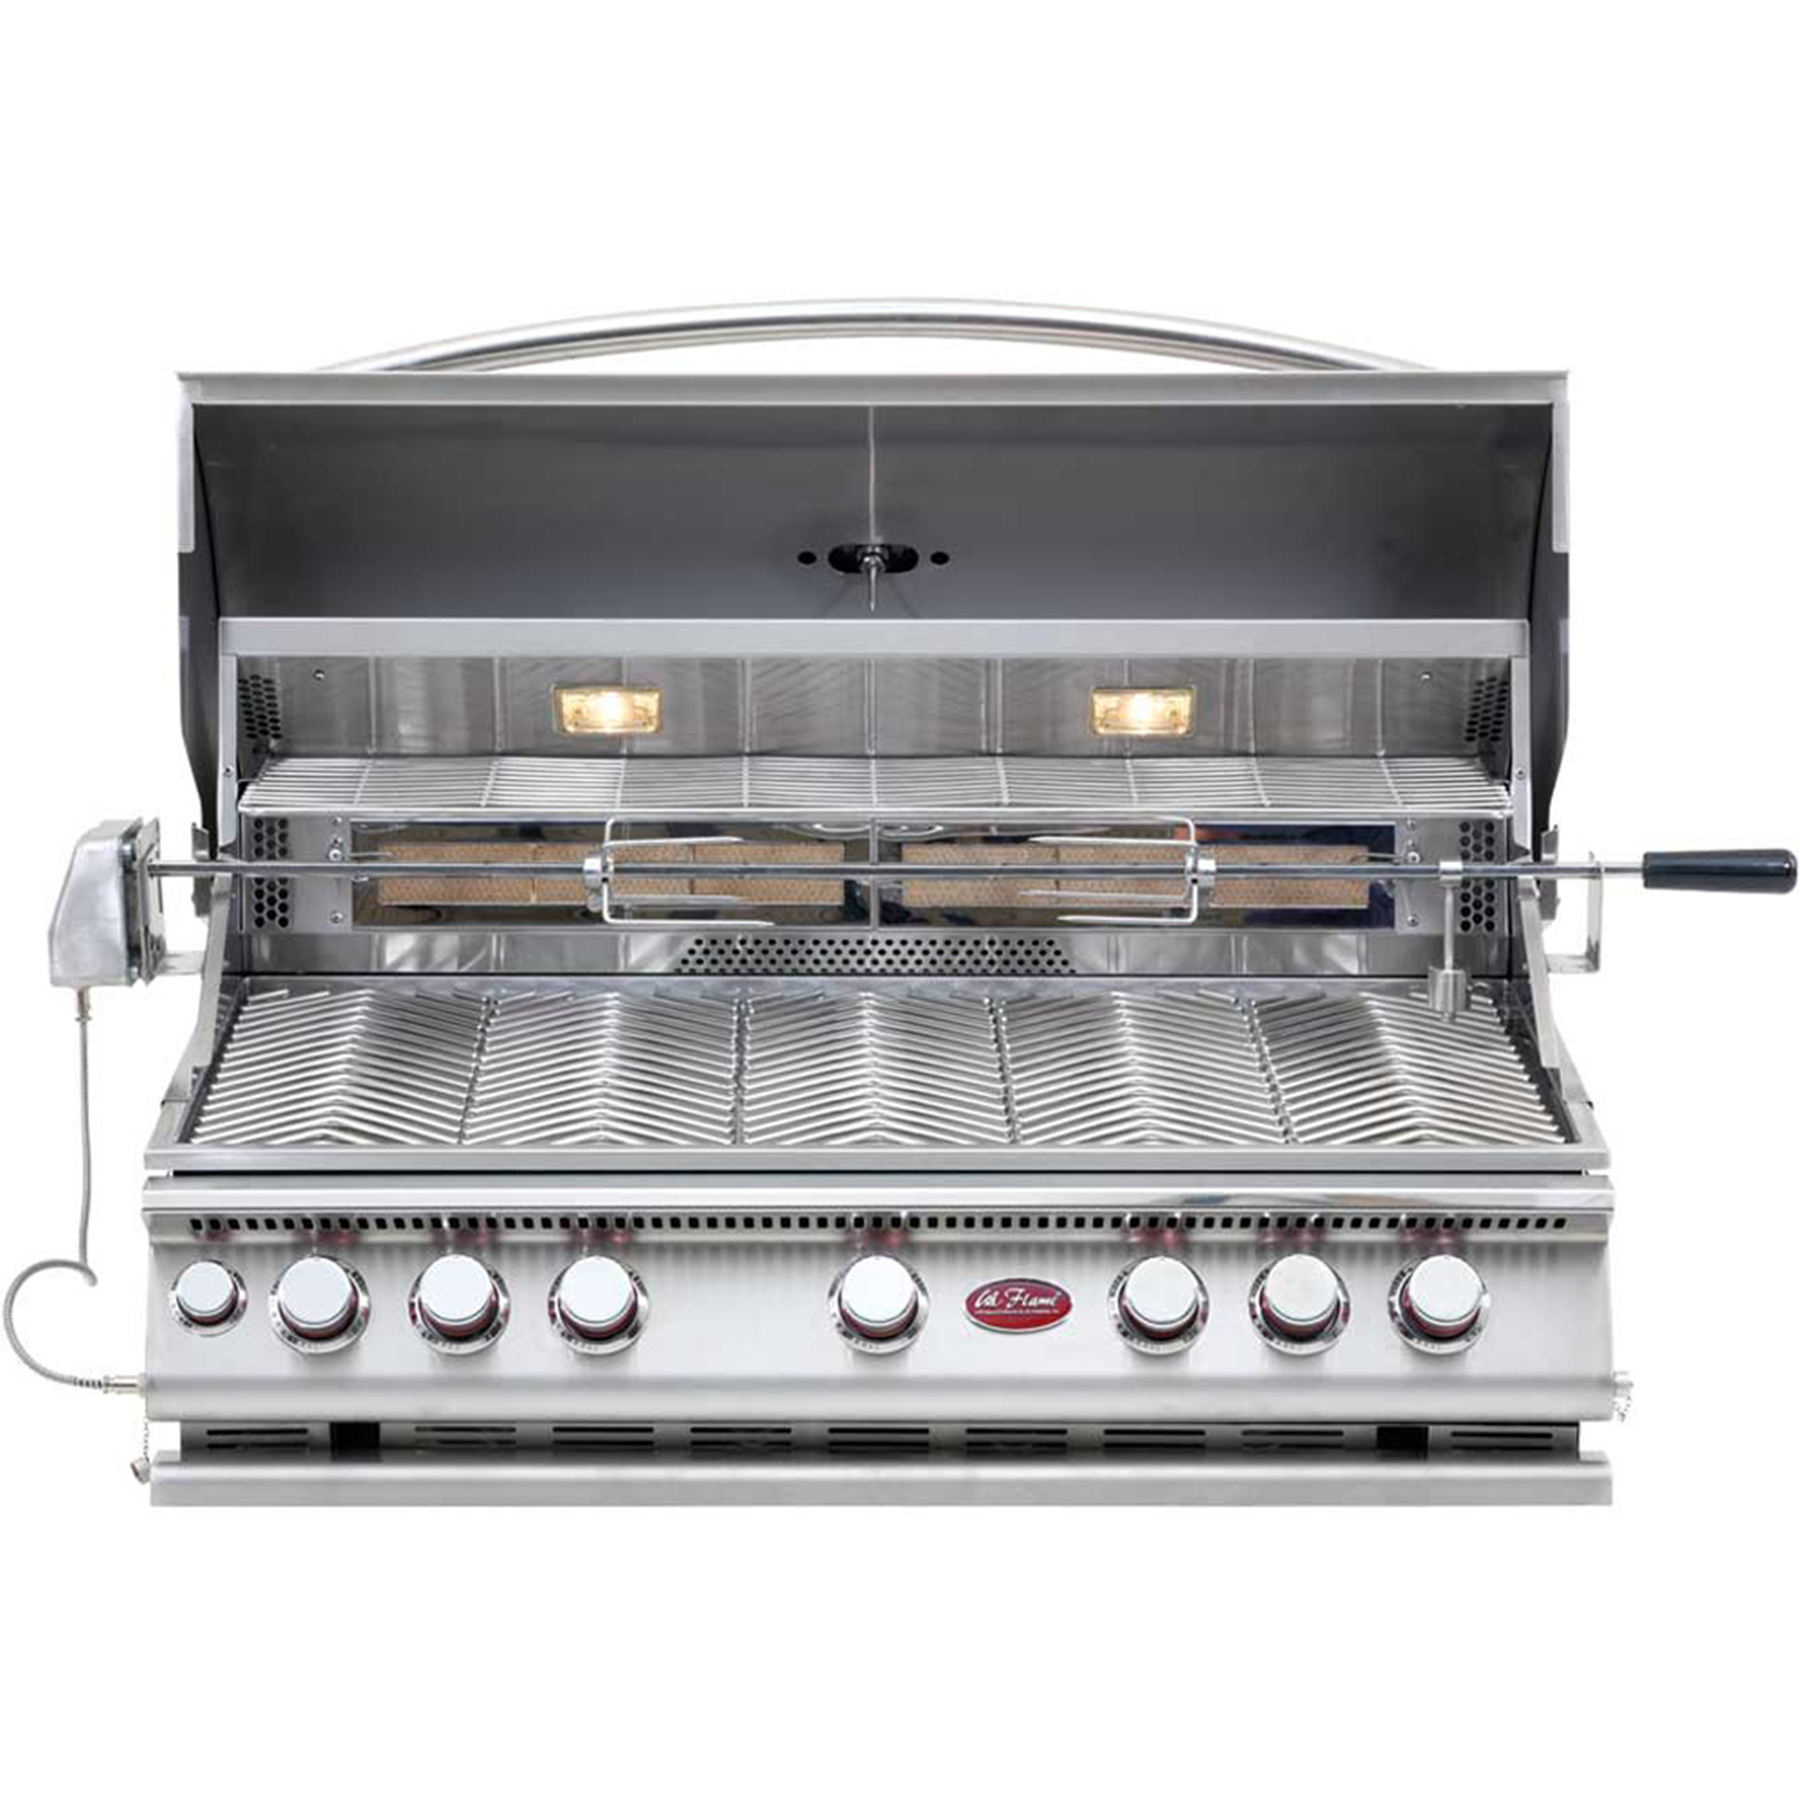 Cal Flame 5-Burner Stainless Steel Convection Grill with Rotisserie